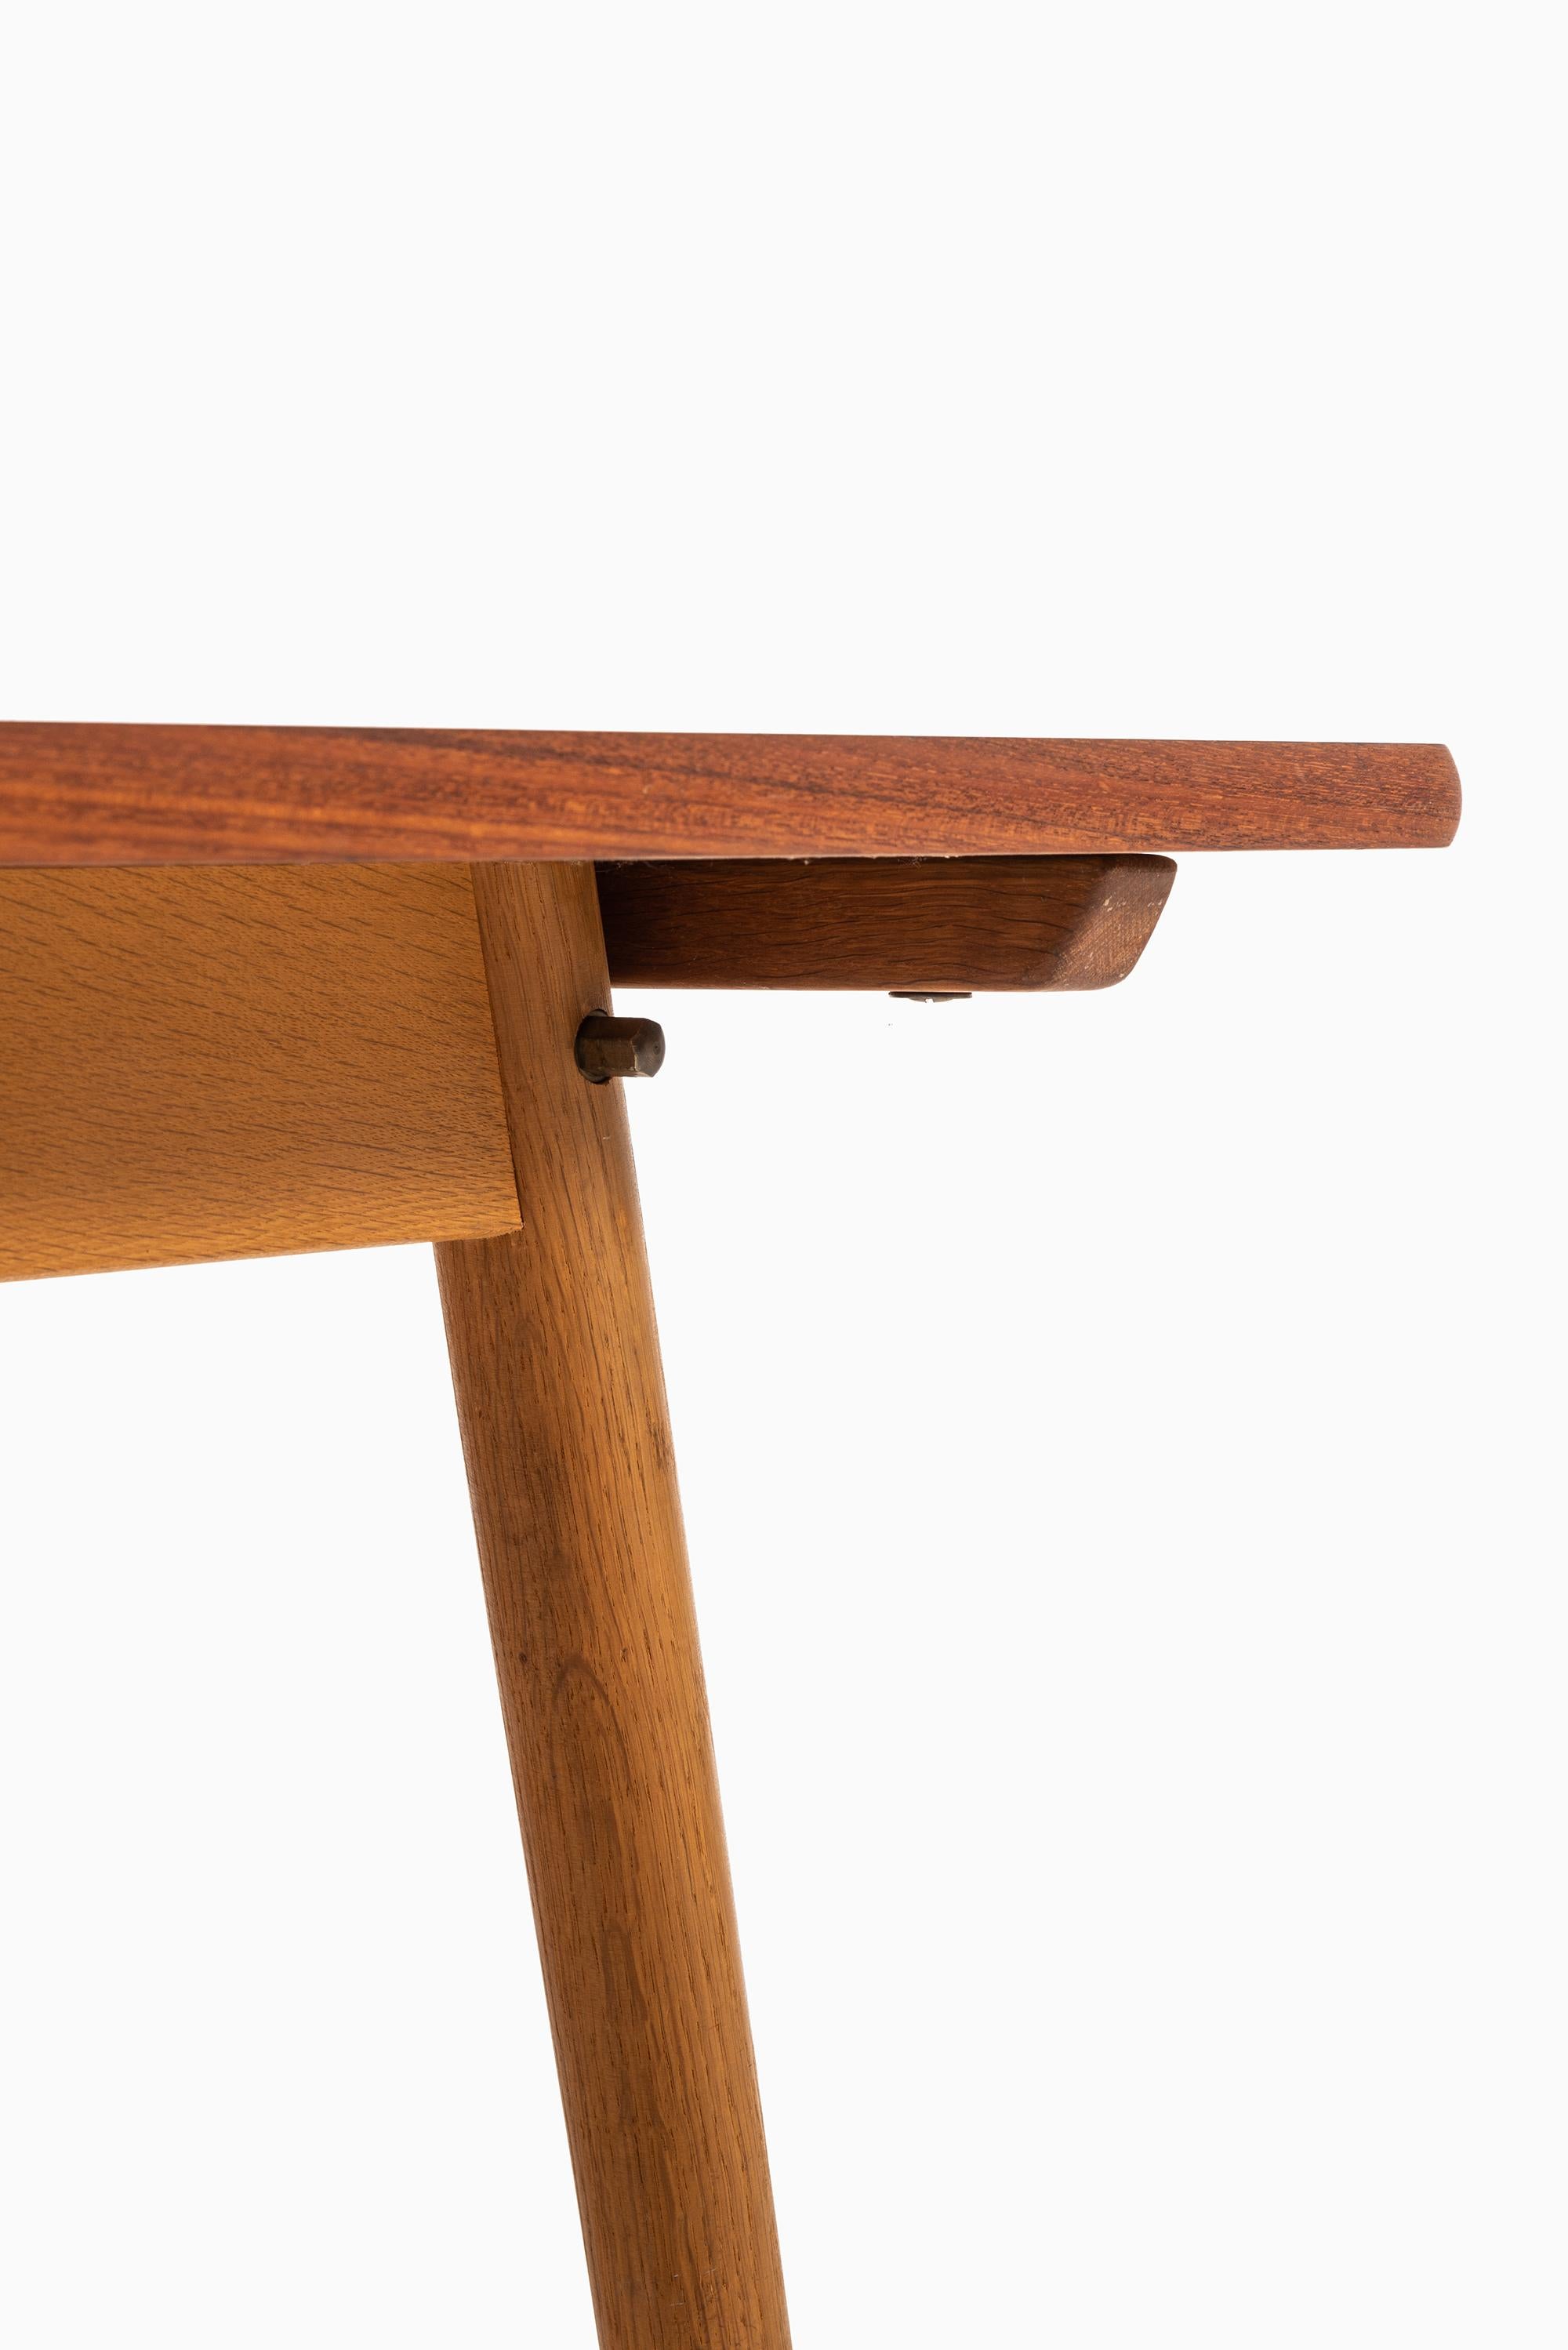 Mid-20th Century Poul Volther Desk Produced by FDB Møbler in Denmark For Sale